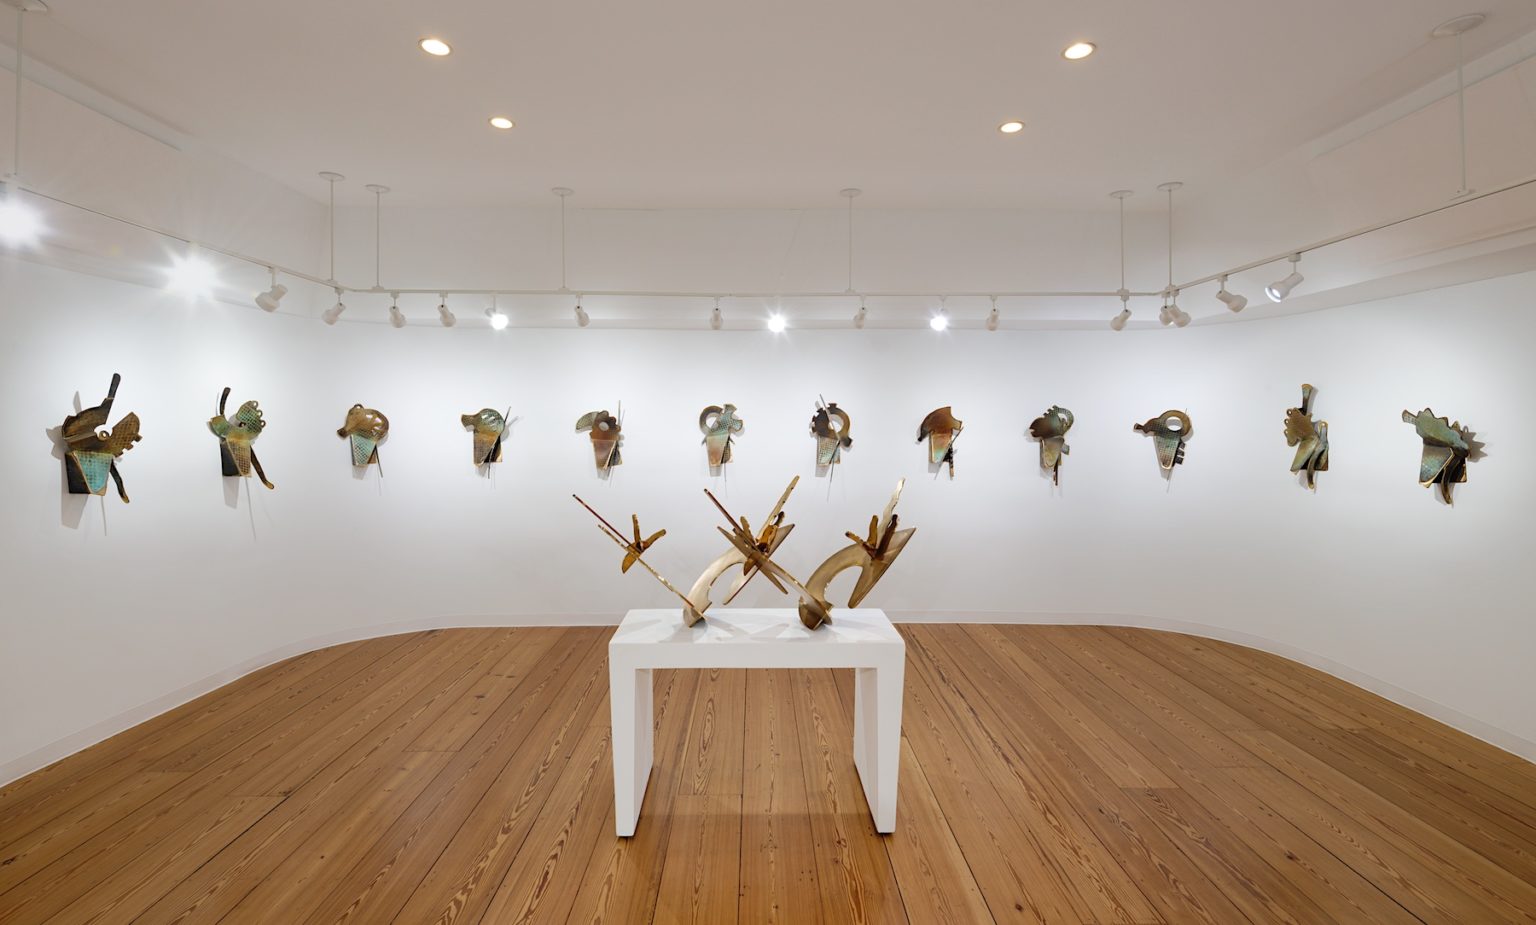 Gallery walls are adorned with 12 wall sculptures with a single gold sculpture in the middle upon a white pedestal amid the oak gallery floors.